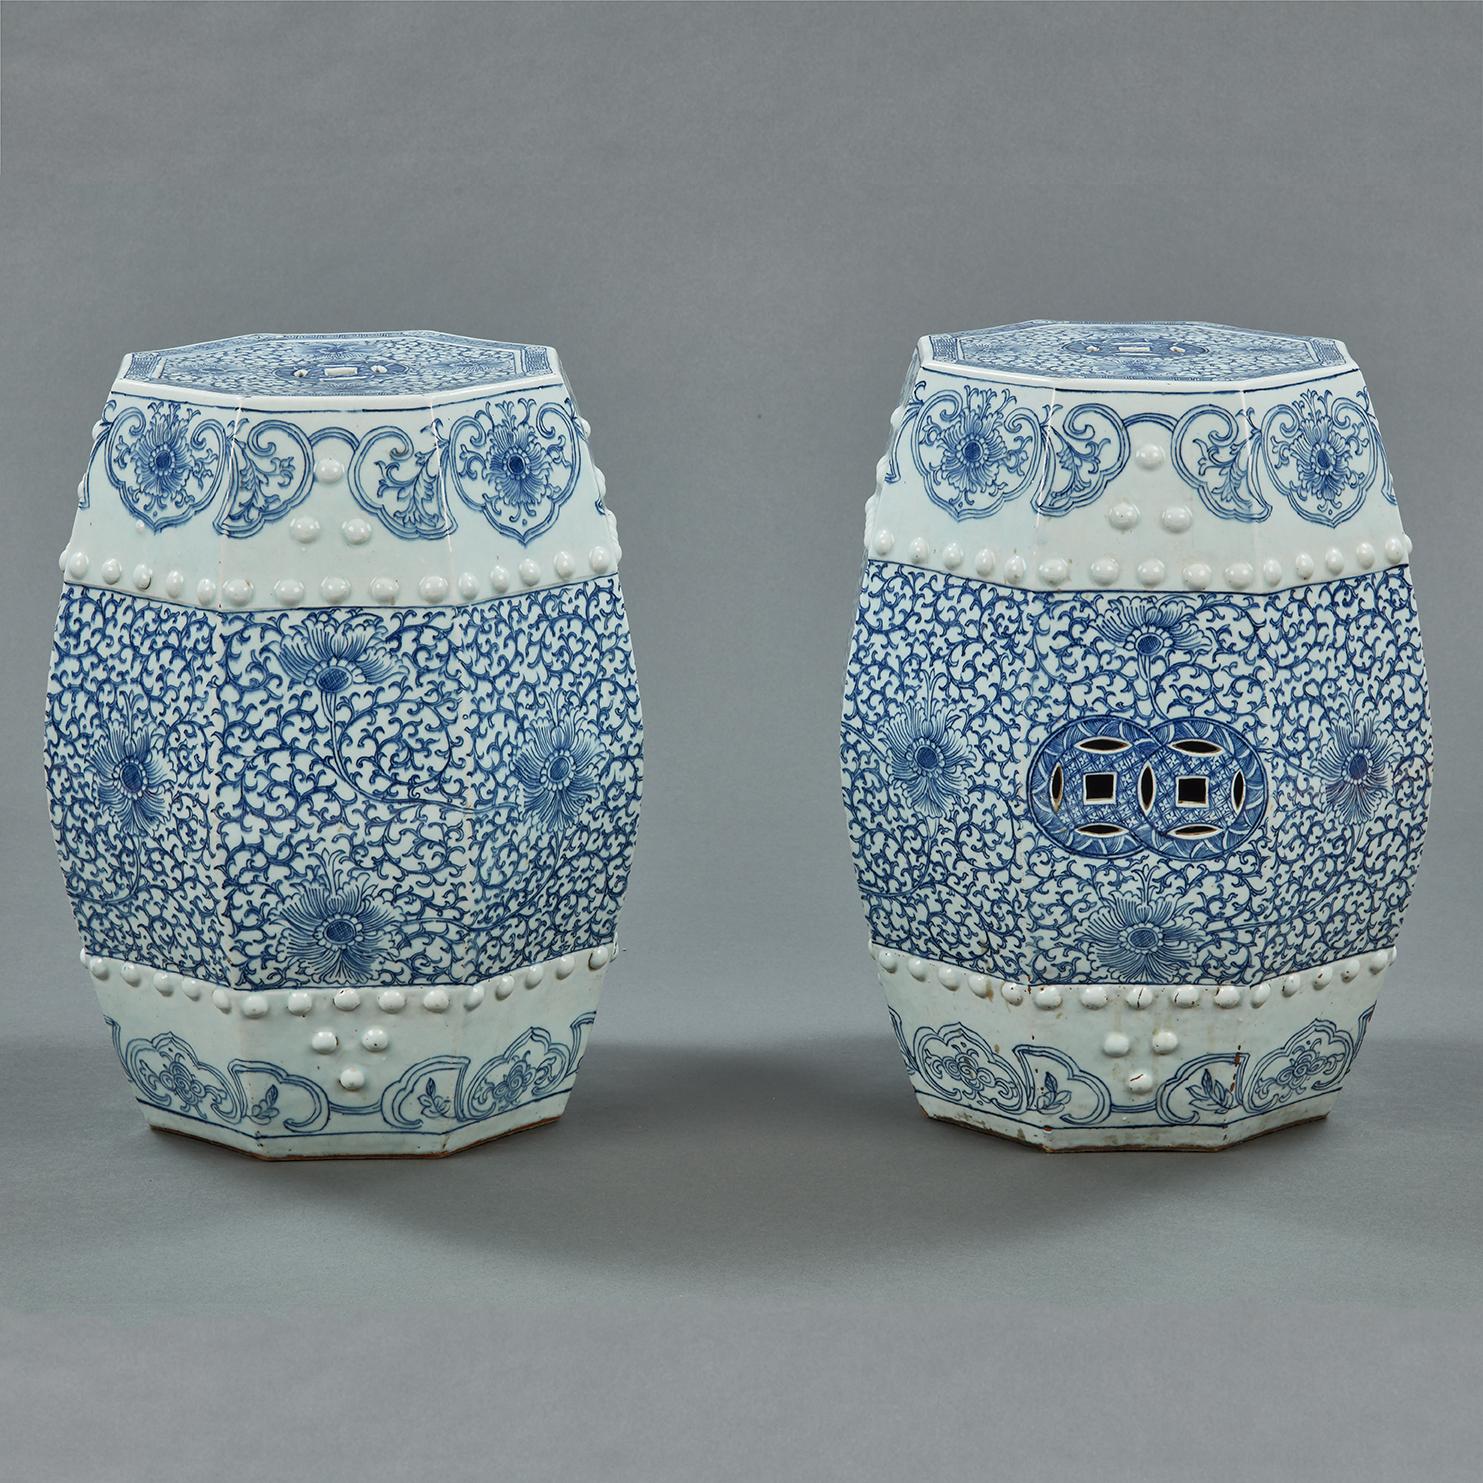 Chinese Export Pair of 19th Century Octagonal Chinese Blue and White Porcelain Garden Seats For Sale